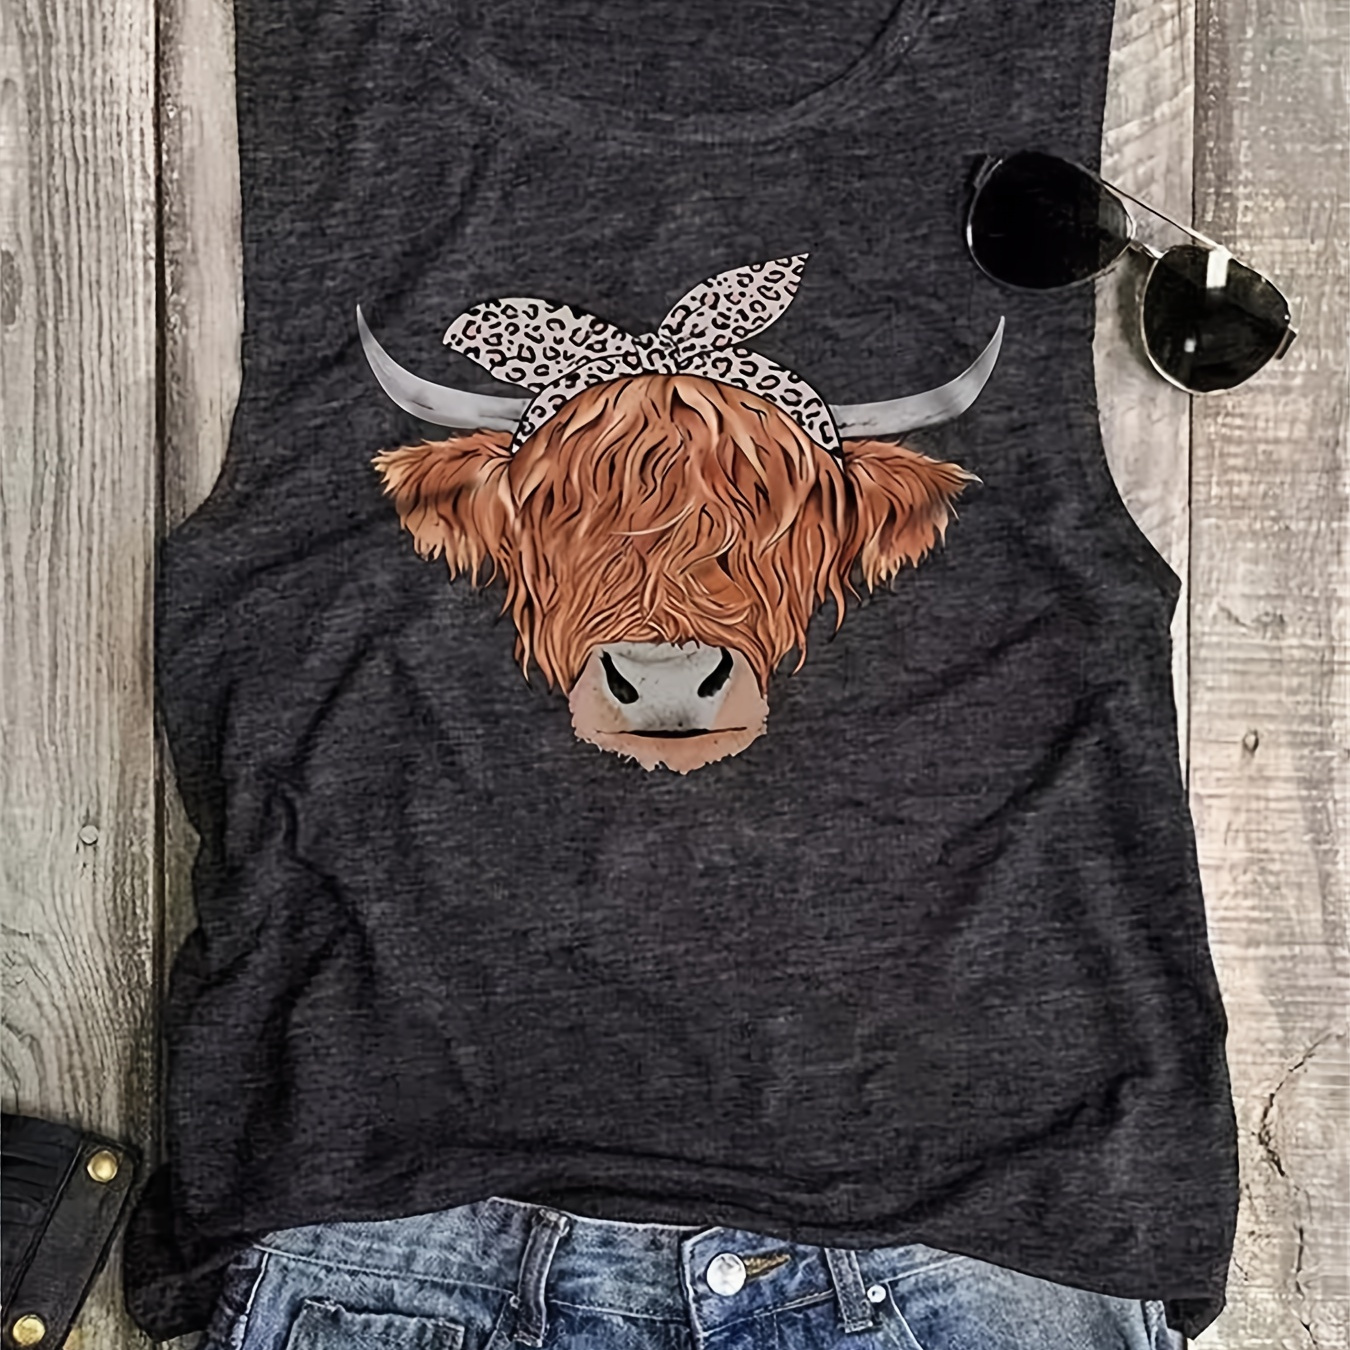 

Cow Head Print Tank Top, Sleeveless Crew Neck Tank Top, Casual Every Day Tops, Women's Clothing